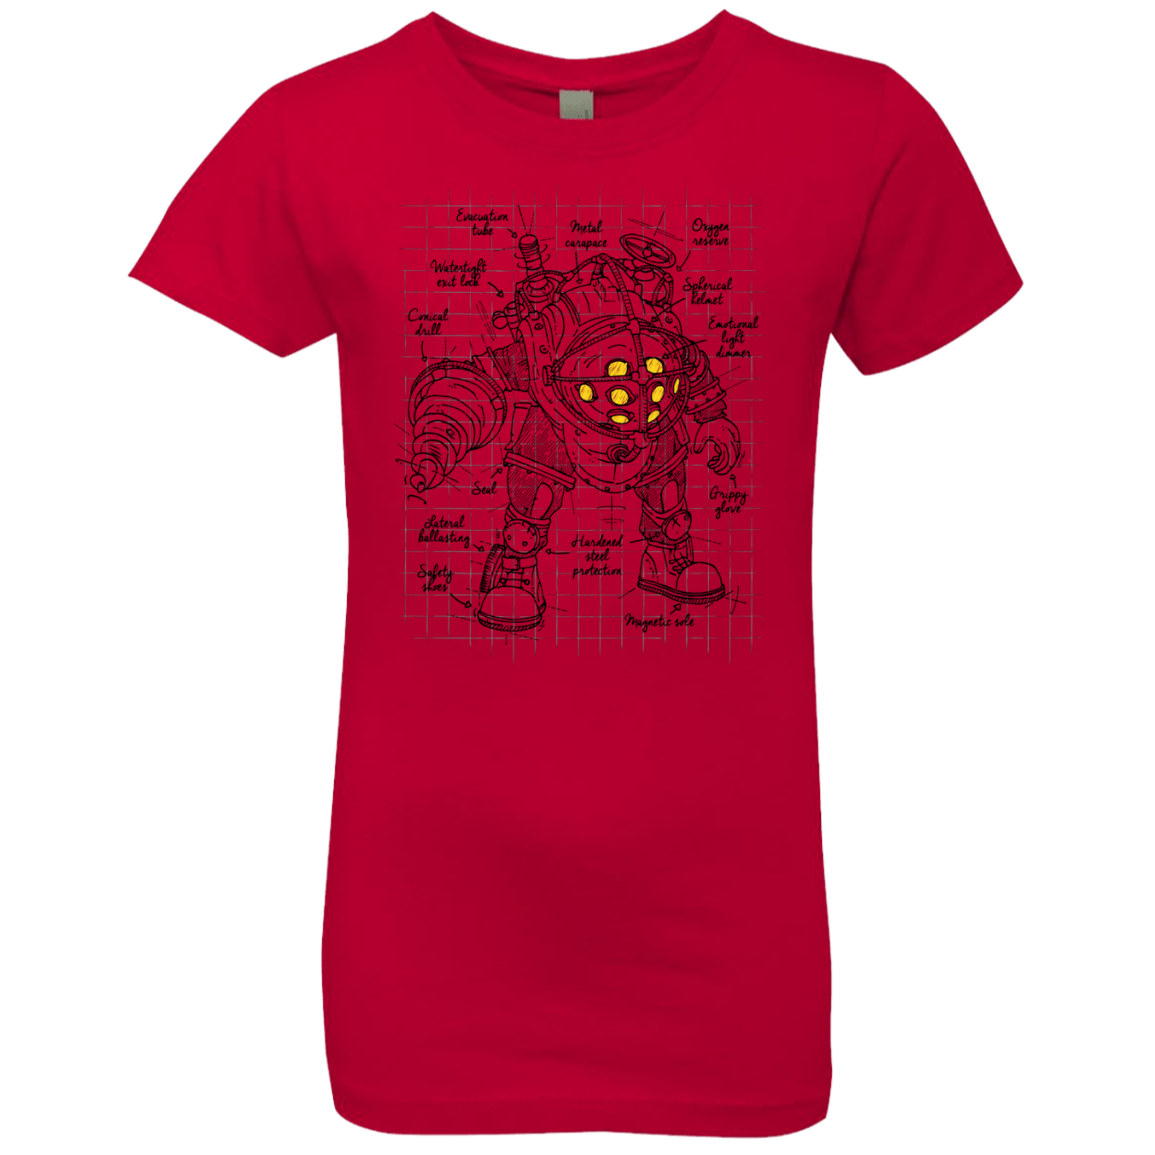 Who's your Big Daddy? Short Sleeve Tee (Cardinal Red)